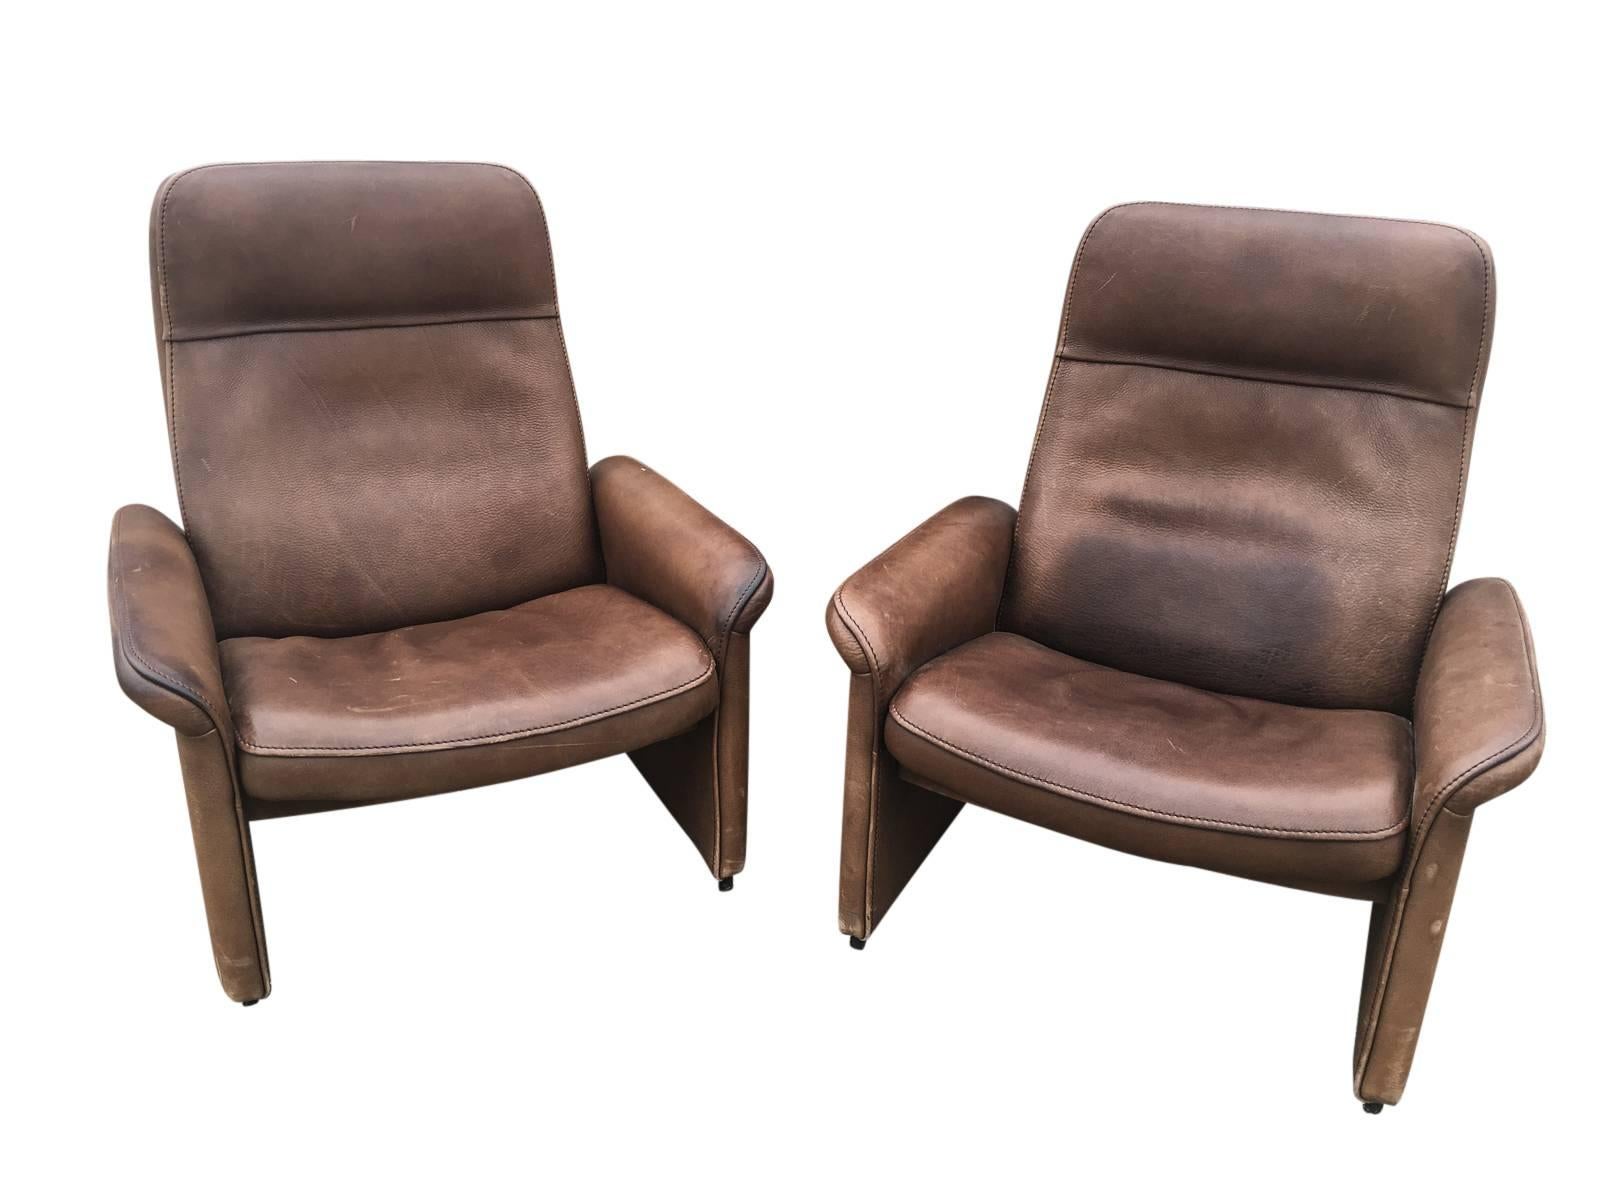 Pair of Leather Lounge Chairs Manufactured by De Sede, Switzerland 2